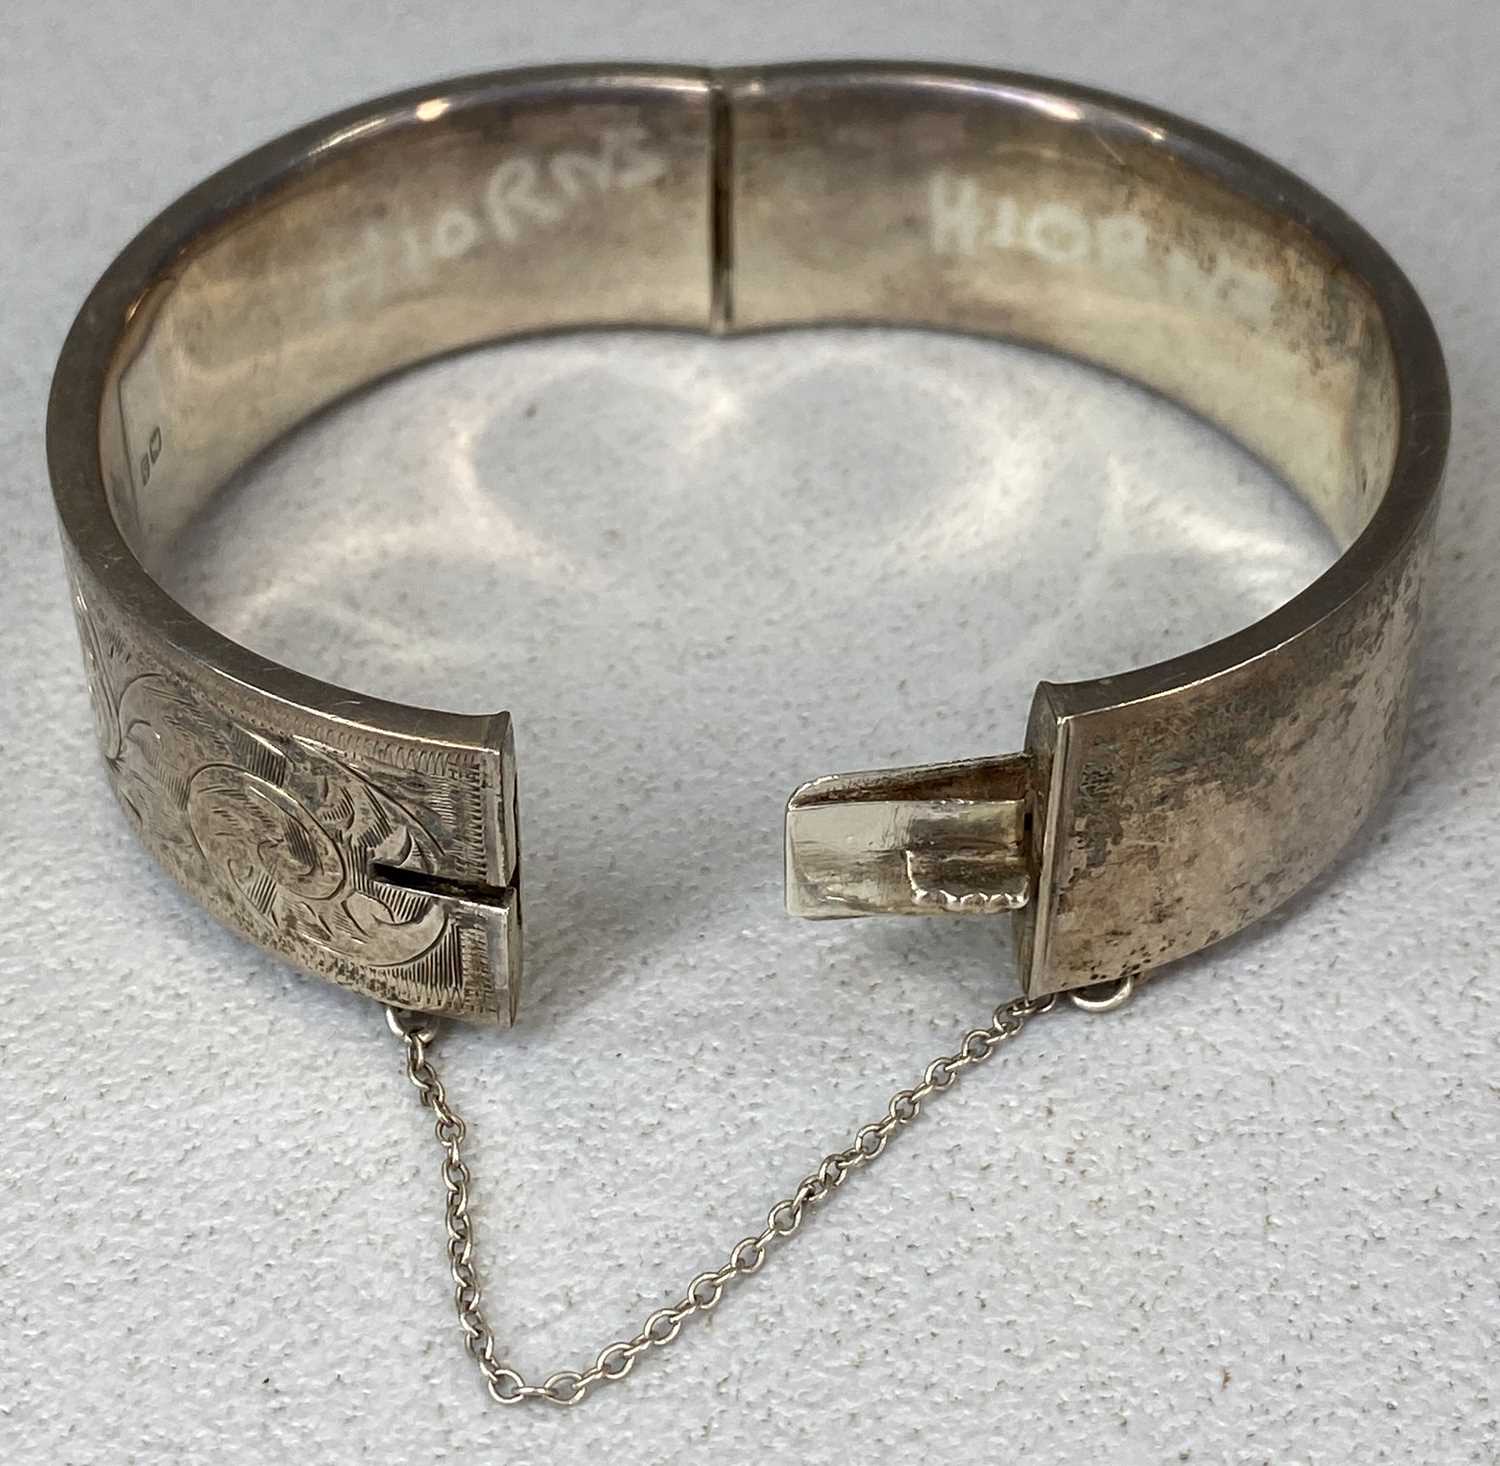 GROUP OF MIXED SILVER JEWELLERY including hollow silver bangle, scroll engrave decoration, child's - Image 2 of 5